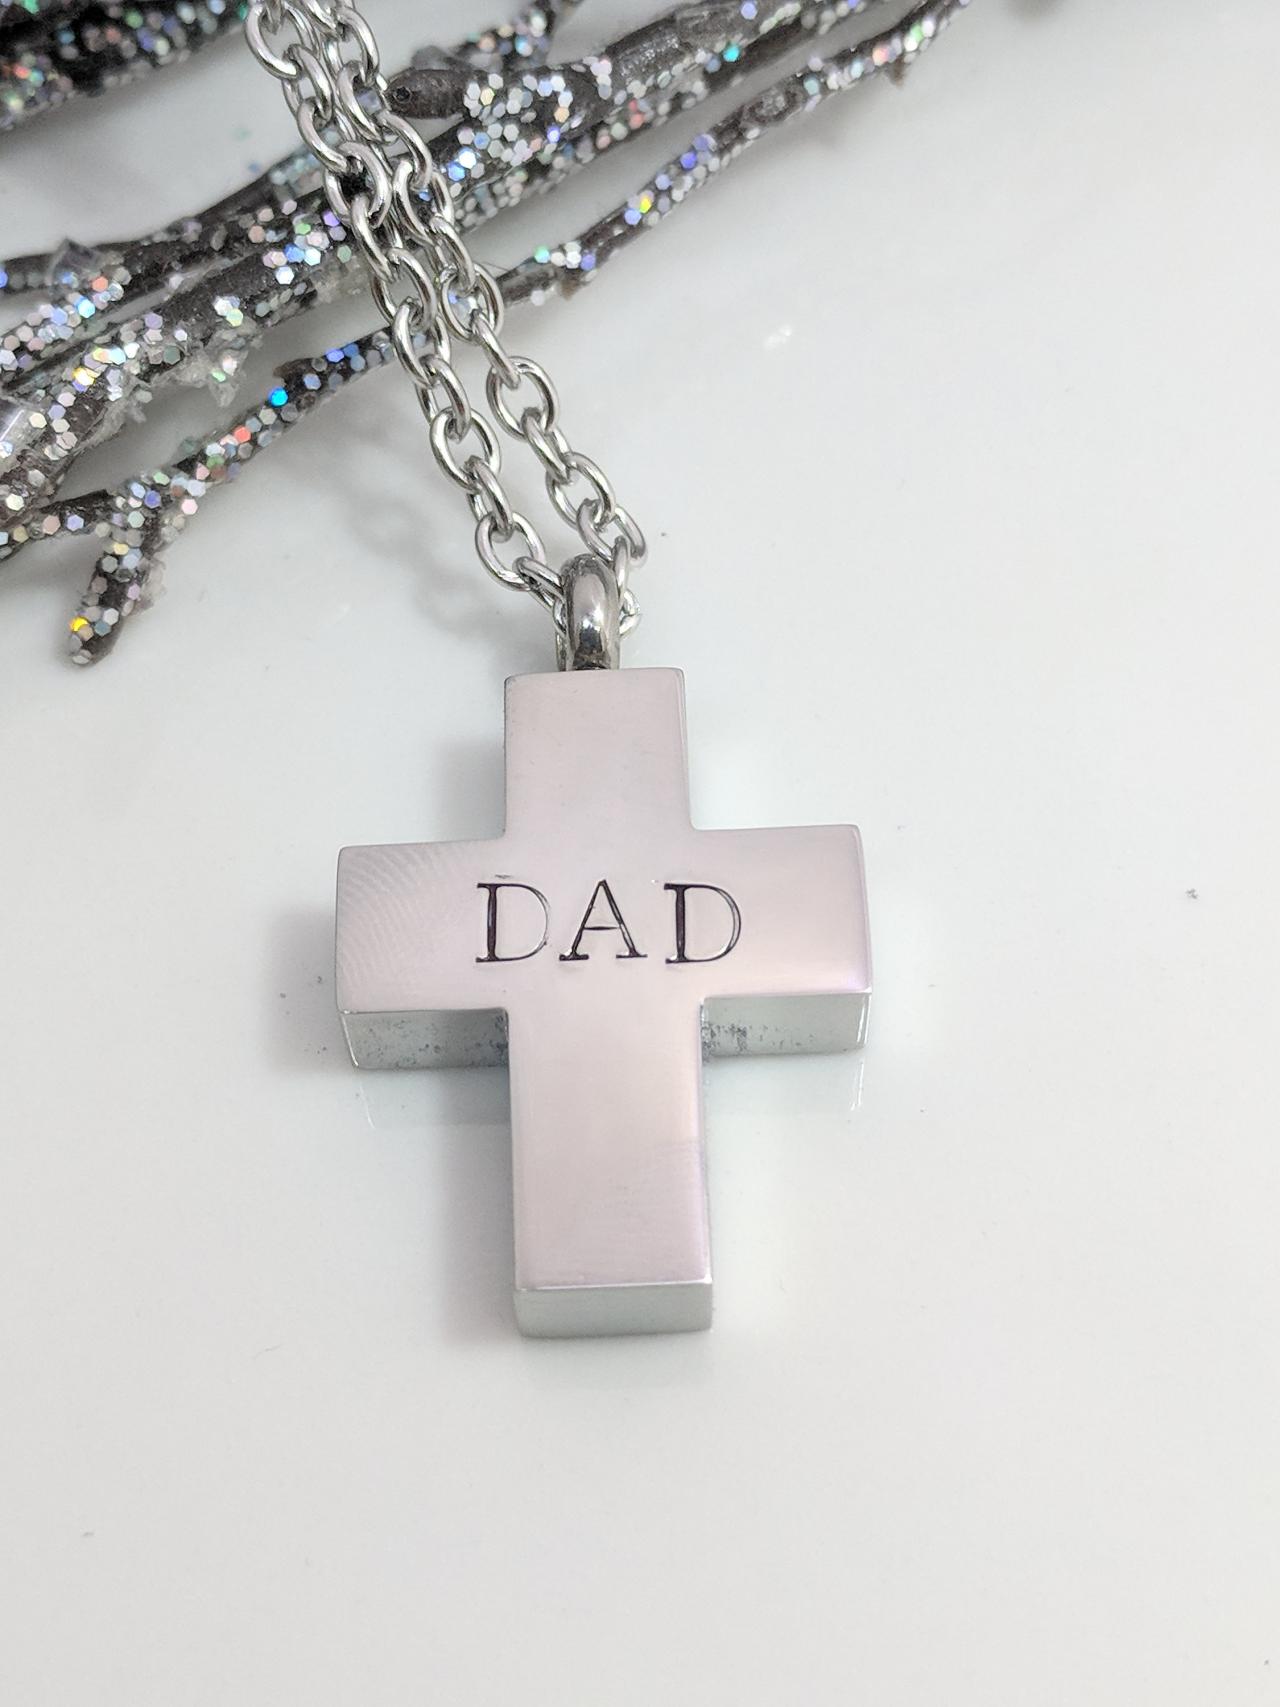 Ready To Ship - Loss Of Father - Urn Necklace - Cross Urn - Urn For Ashes - Sympathy Gift - Cremation Necklace - Urn Keepsake - Dad Passing